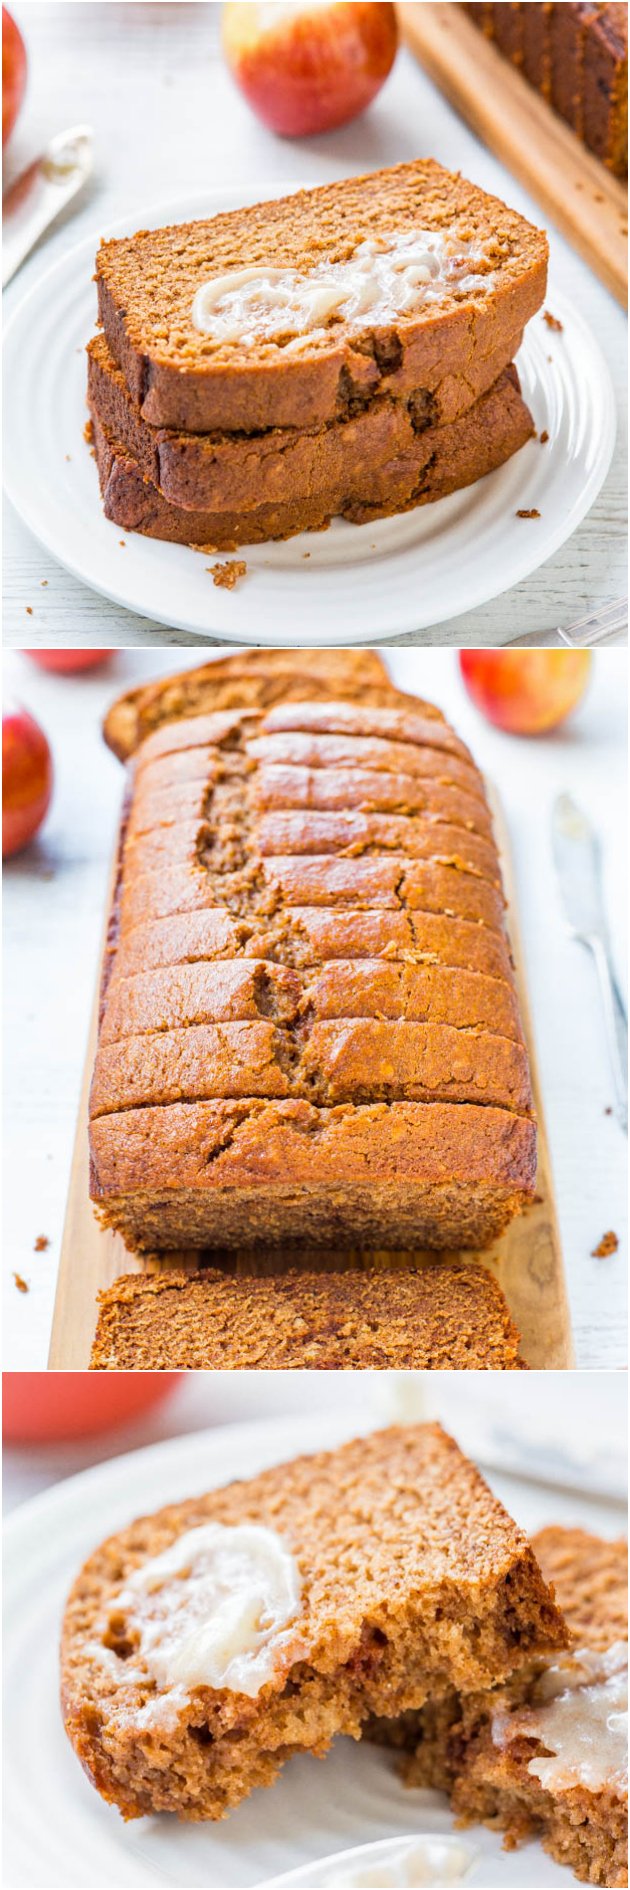 Cinnamon Spice Applesauce Bread with Honey Butter - Applesauce keeps this bread so soft & moist! It's like apple spice cake, disguised as 'bread' so you can have extra!